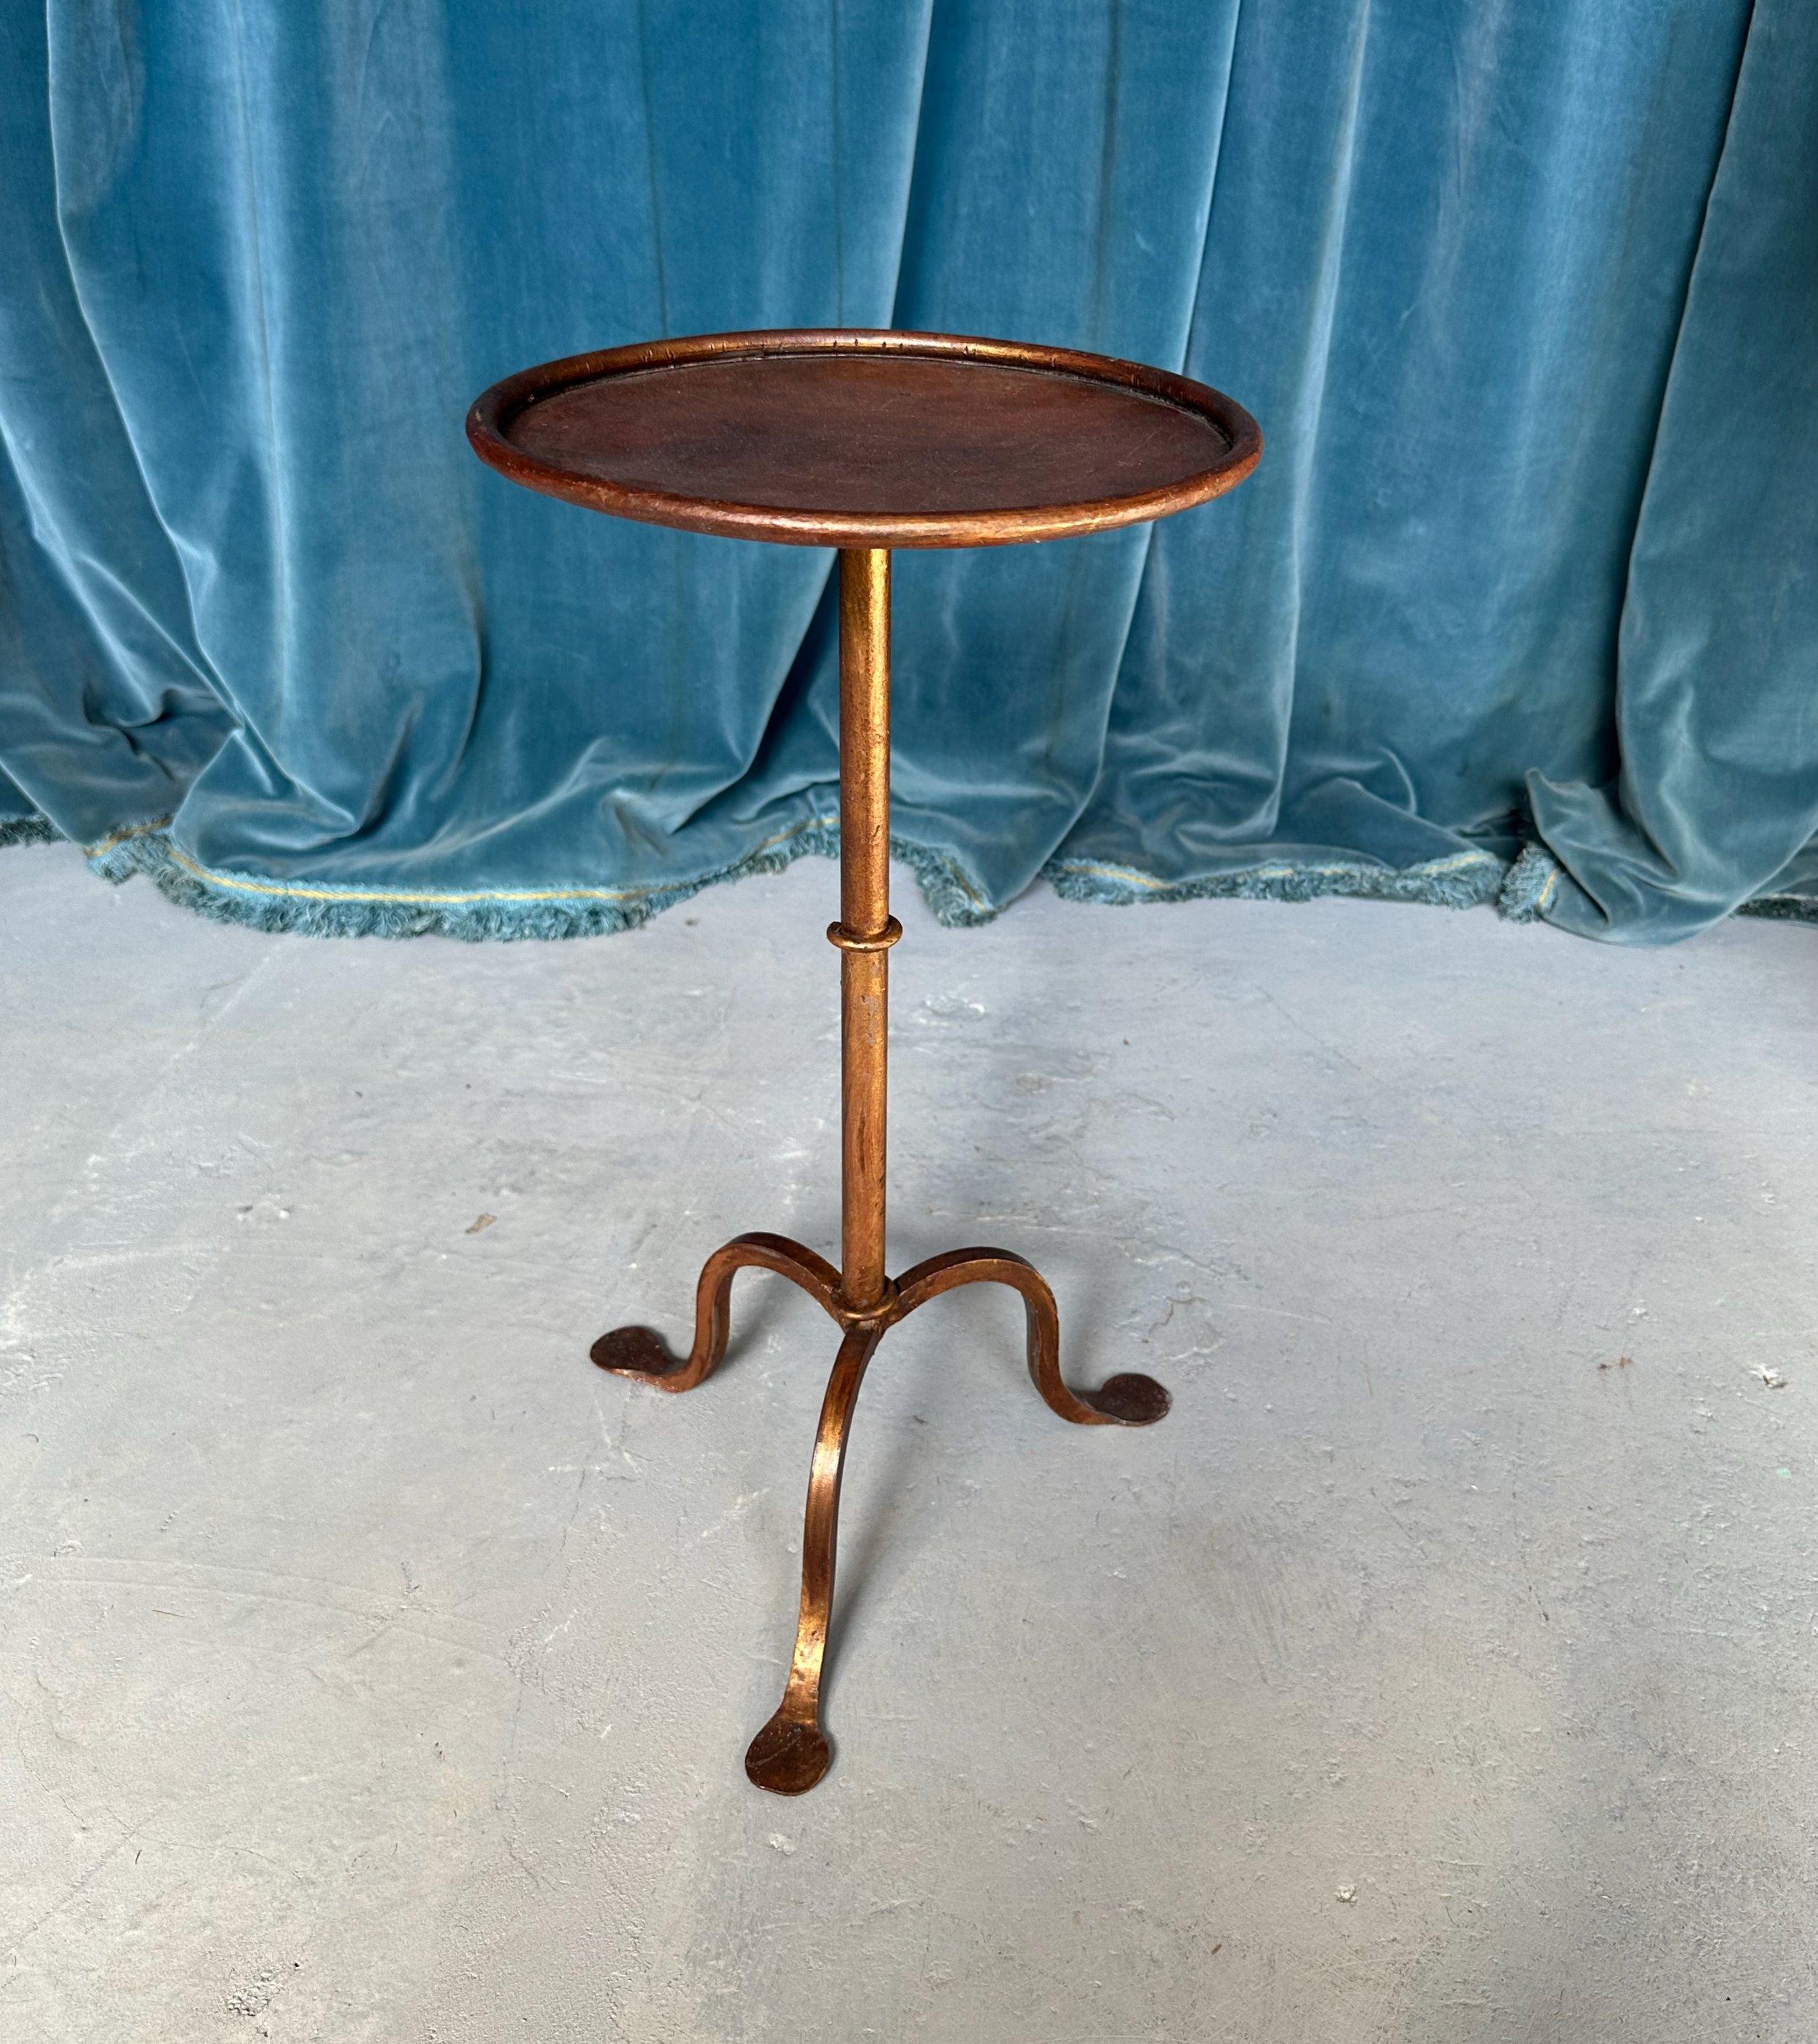 This small iron and metal end table from Spain was recently crafted by skilled artisans using traditional iron-working techniques. Based on a vintage 1950s design, it features a sturdy tripod base with hammered curved legs and a central ring detail